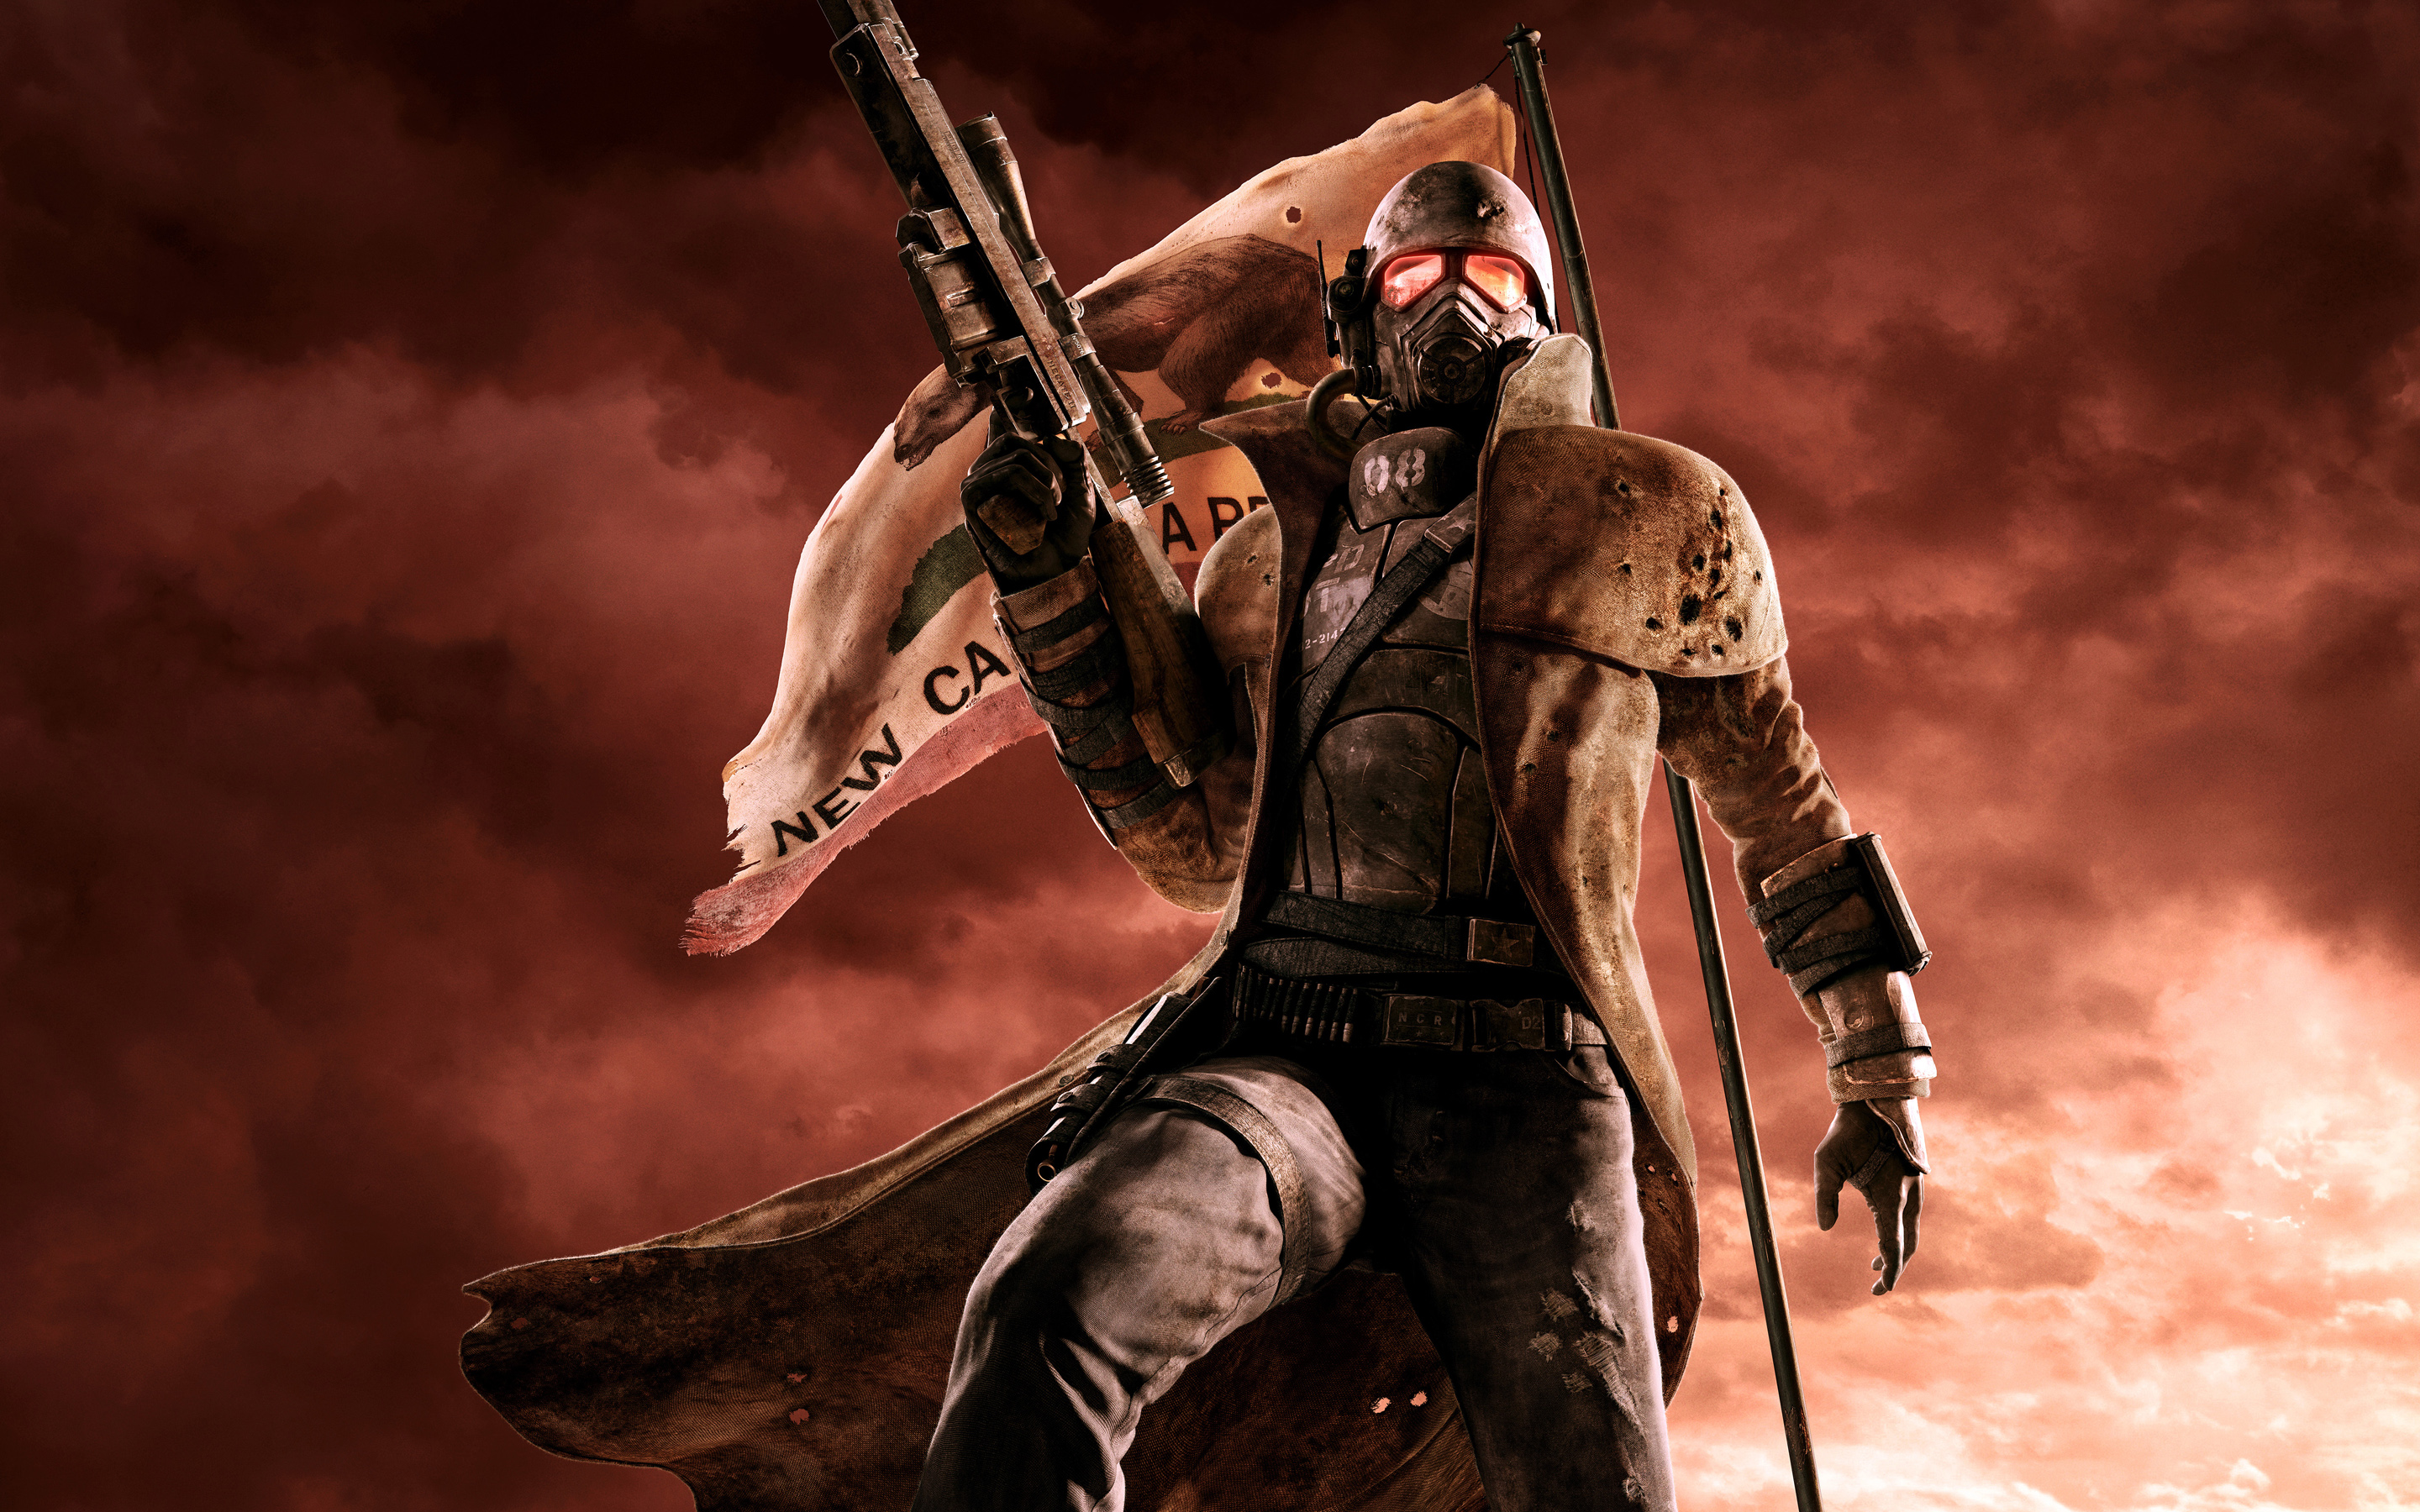 fallout new vegas wallpaper hd,action adventure game,cg artwork,pc game,fictional character,demon